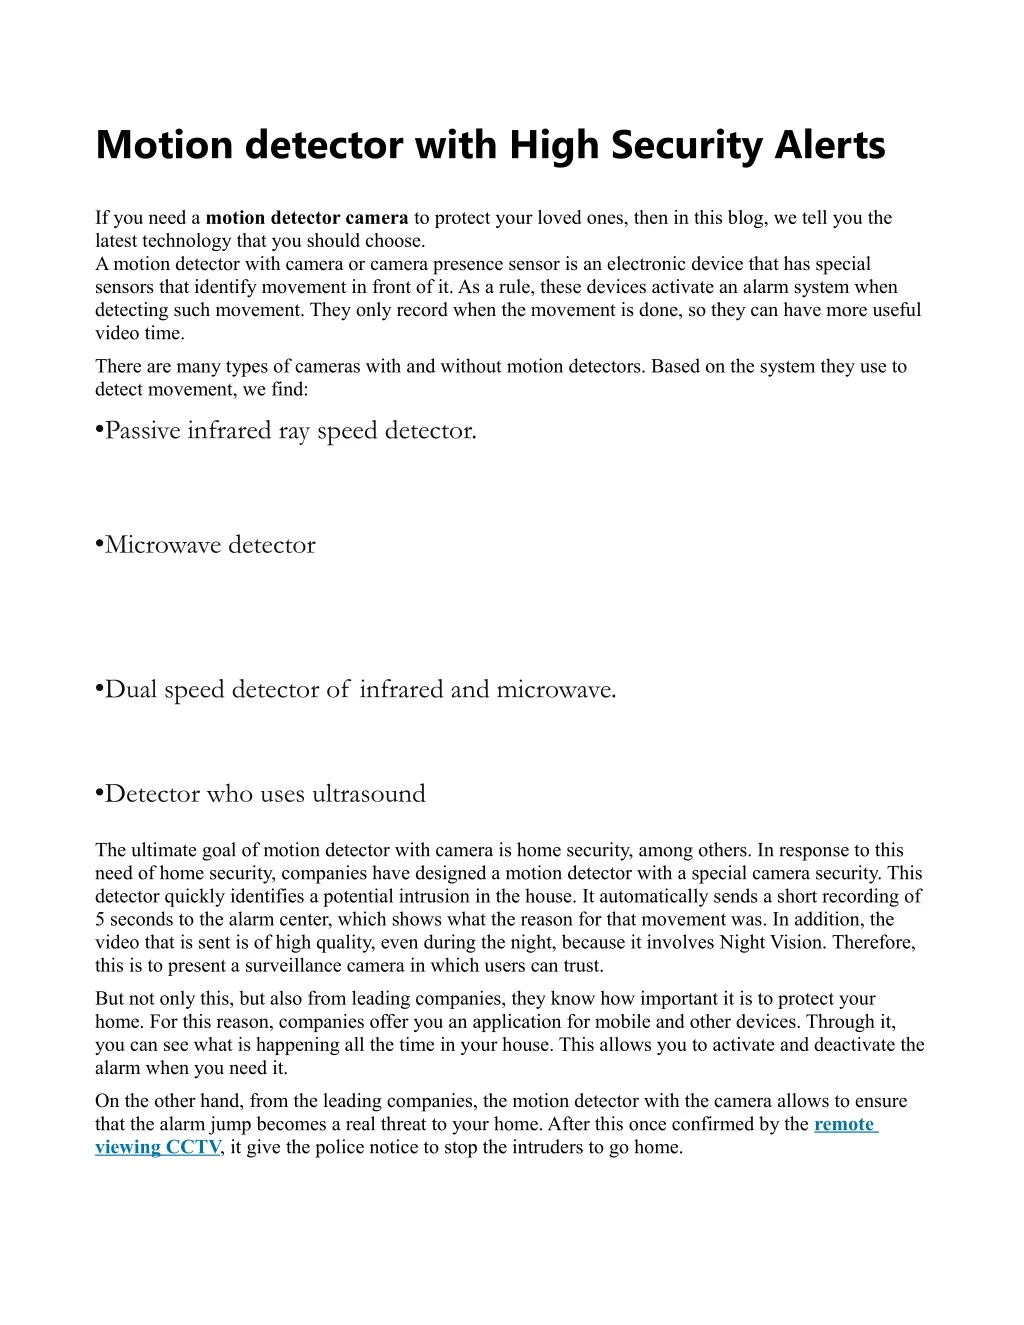 motion detector with high security alerts